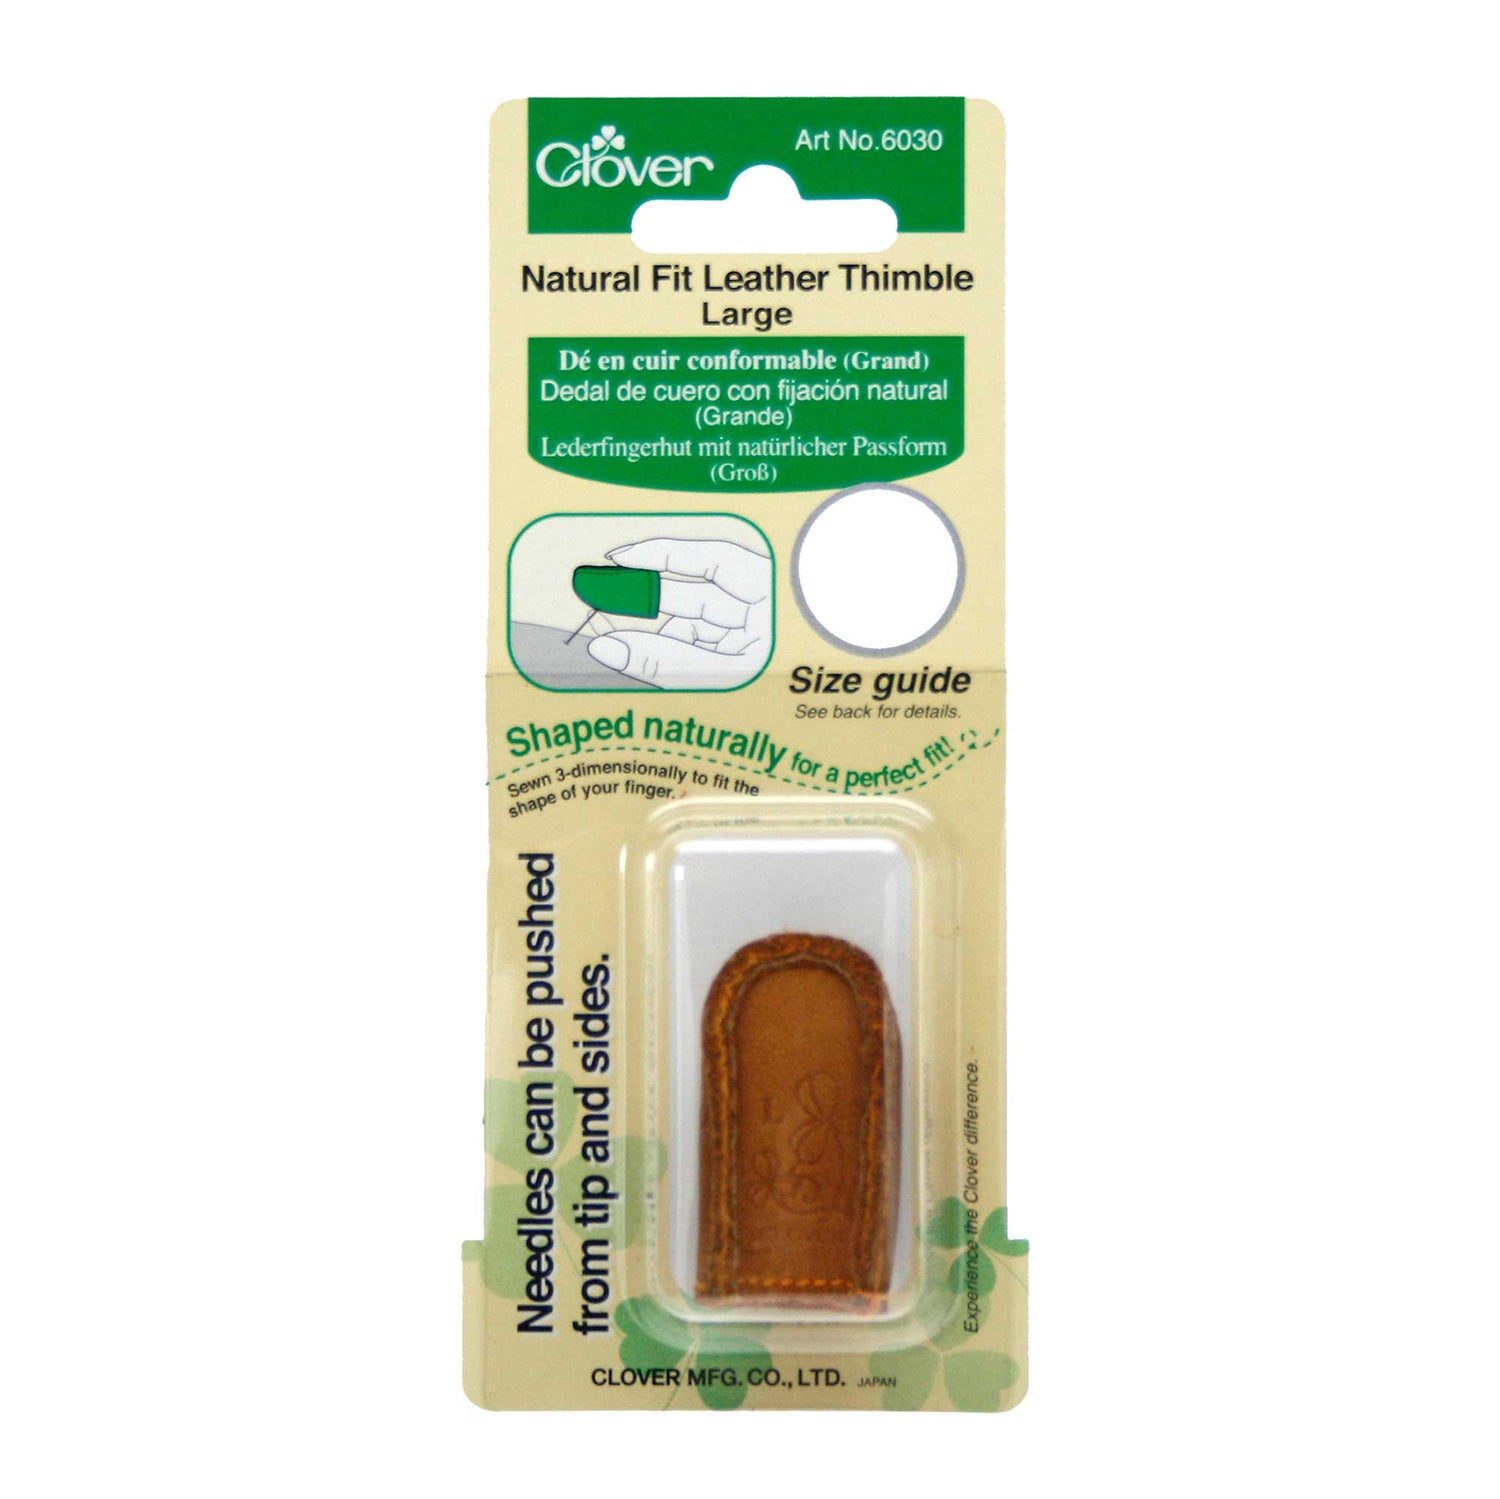 Clover Natural Fit Leather Thimble | Large